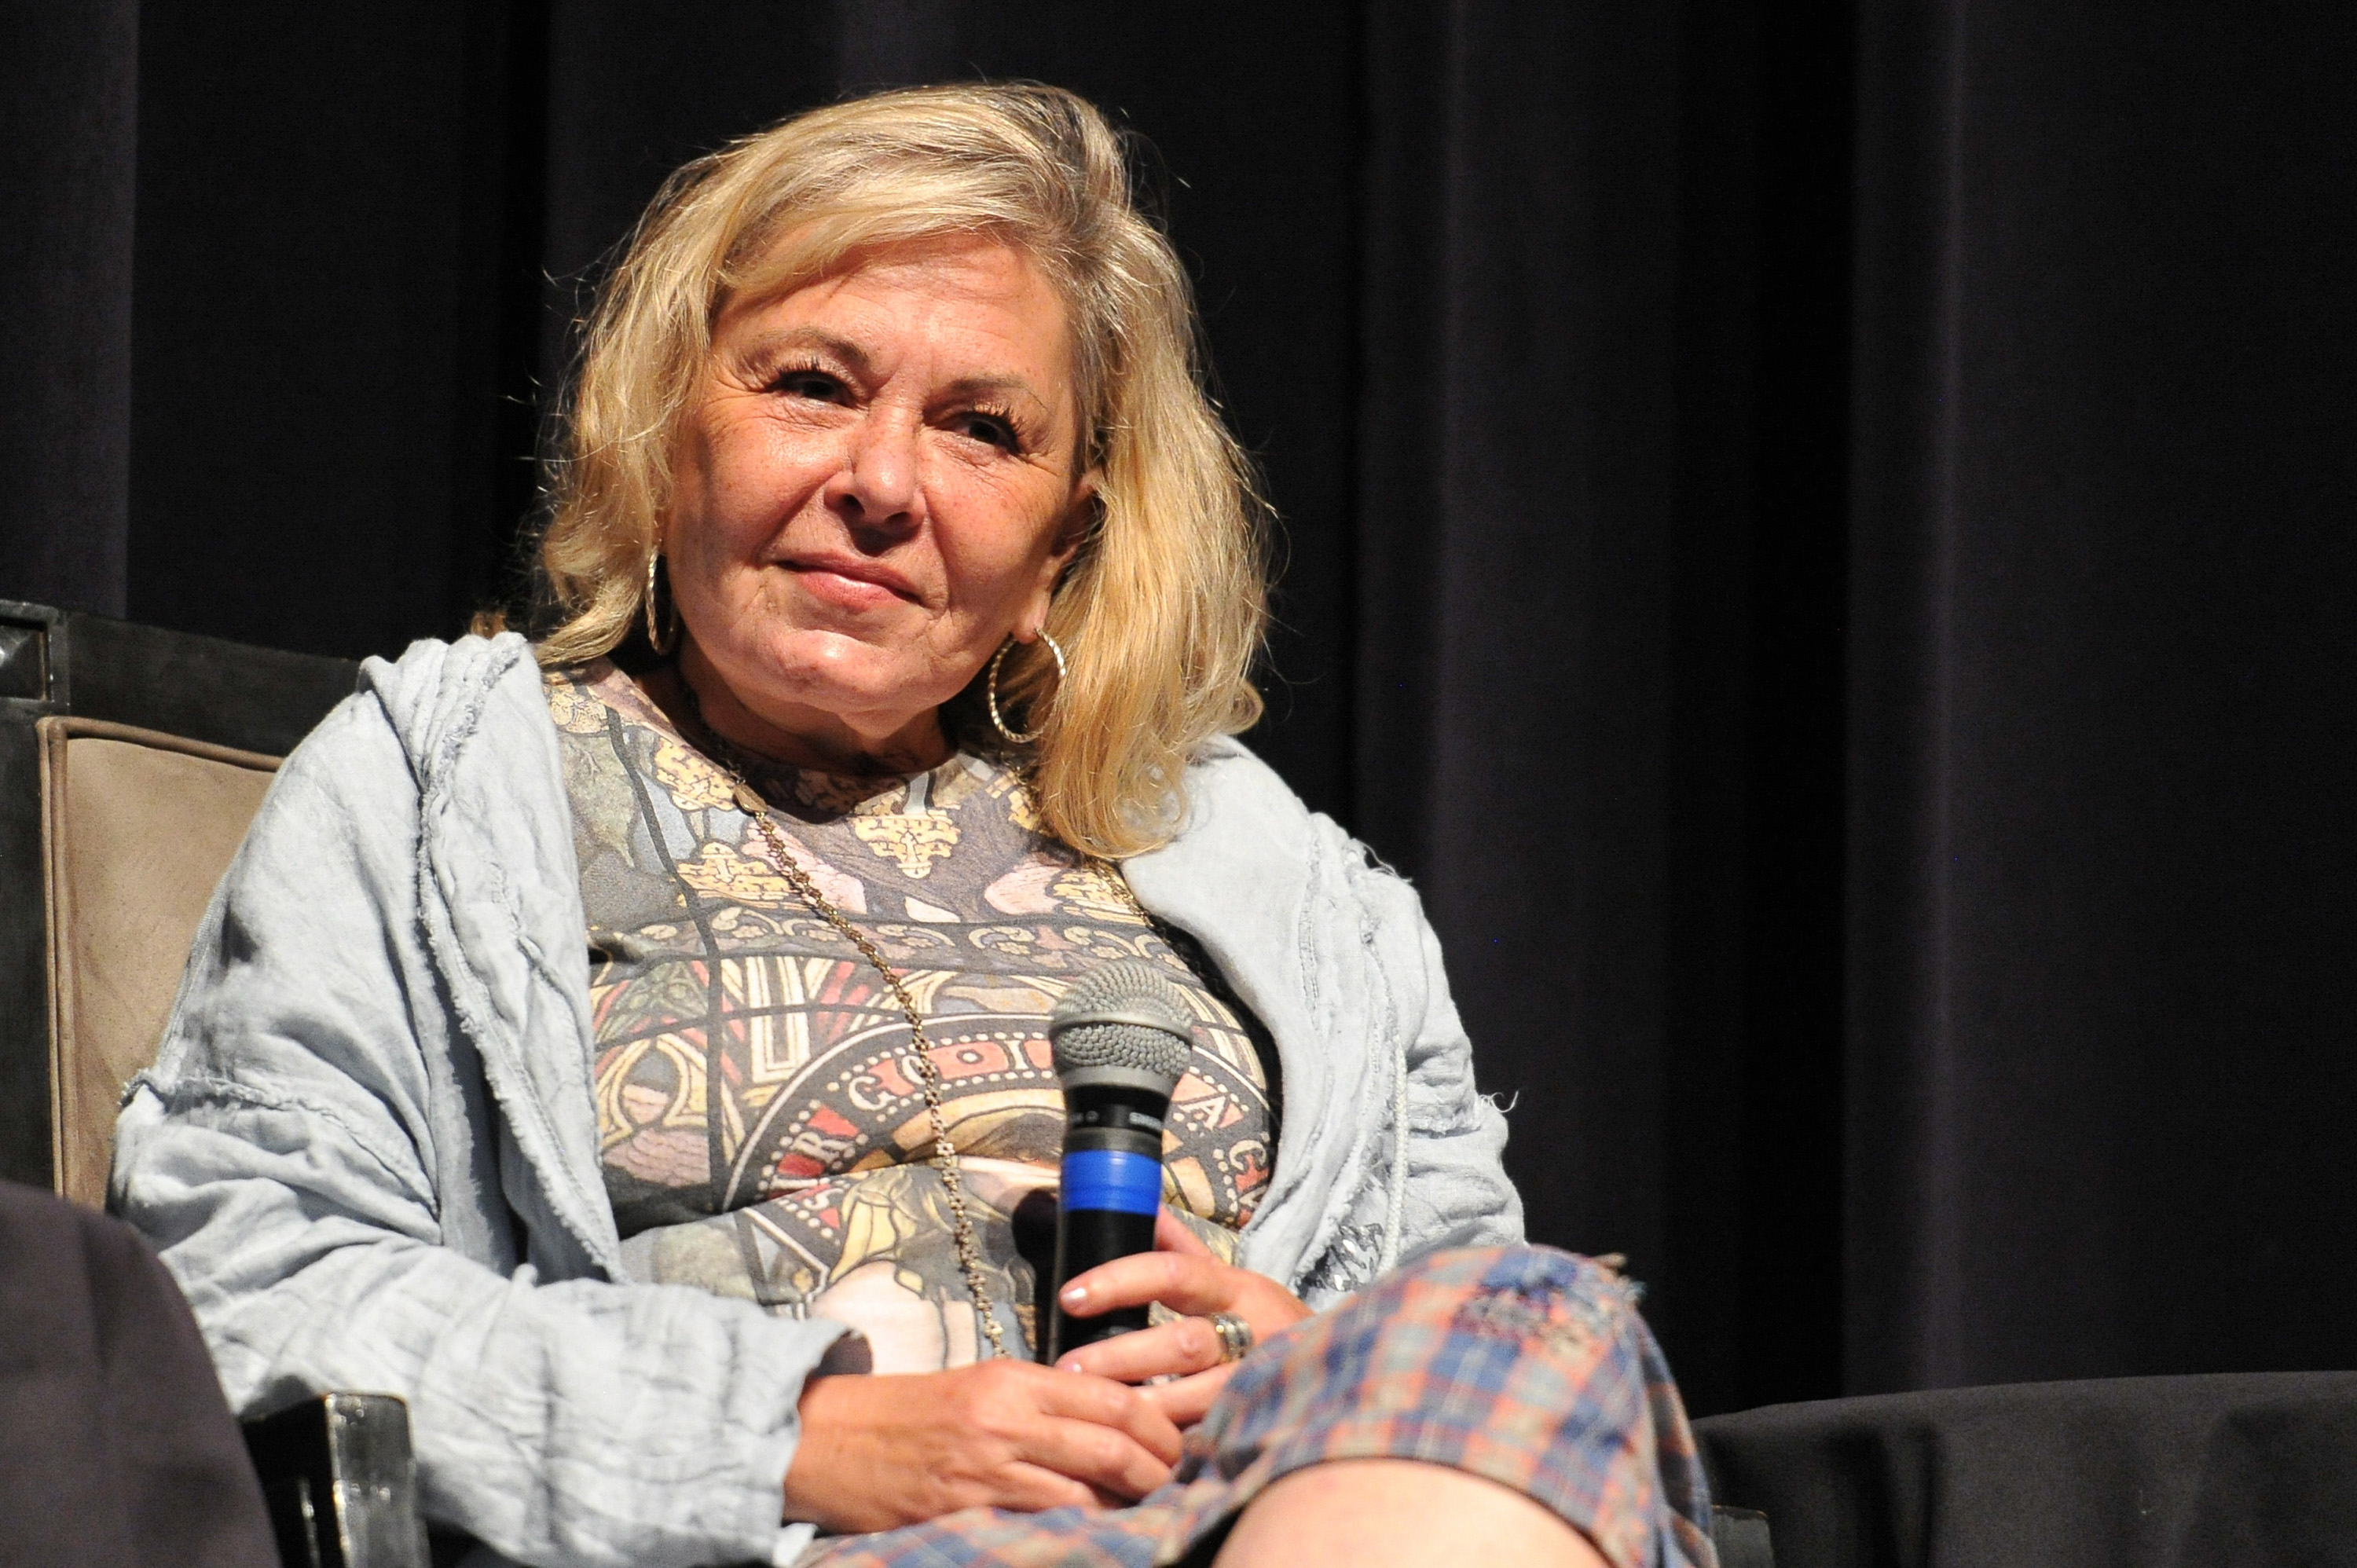 Roseanne sitting and holding a microphone, wearing a patterned shirt and a gray hoodie